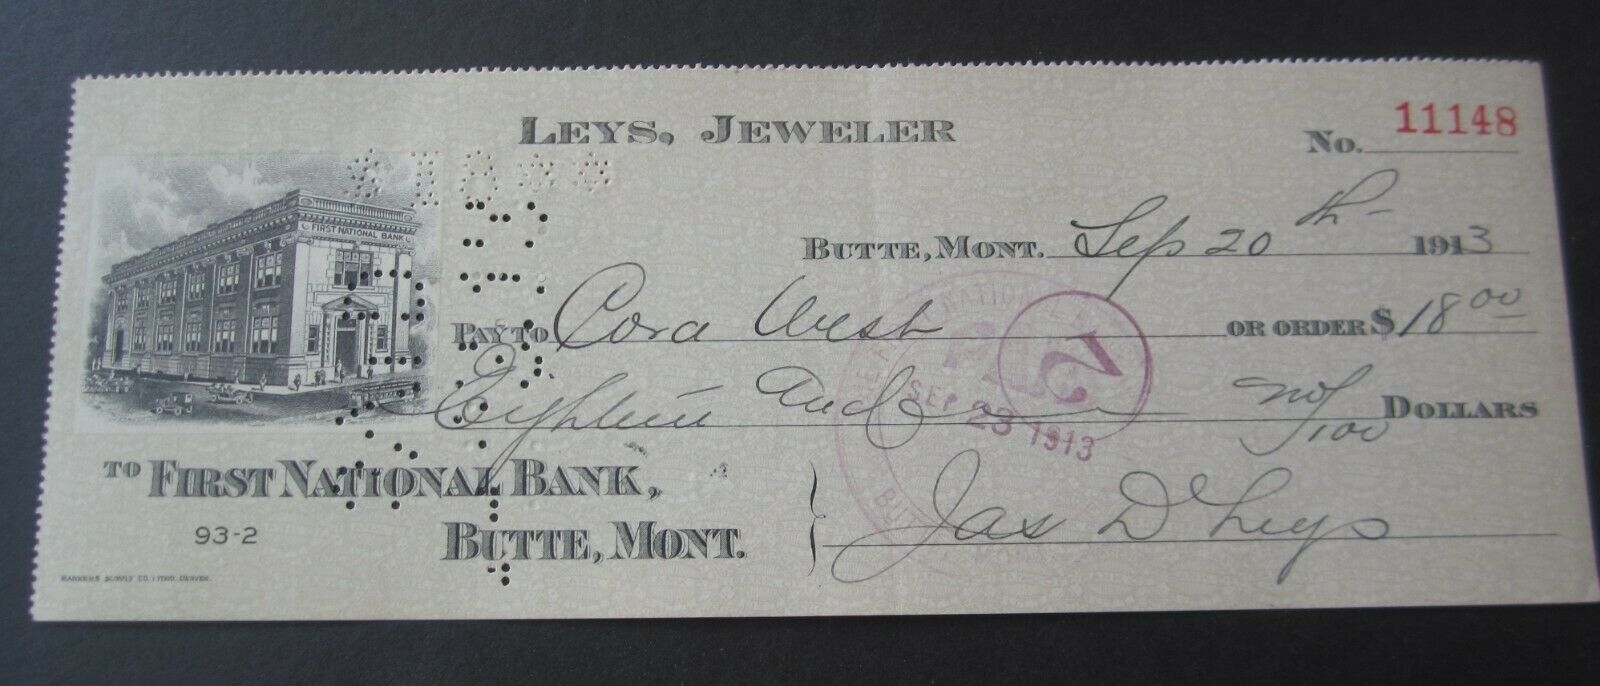 Old 1913 - LEYS - JEWELER - Bank Check - Butte ...